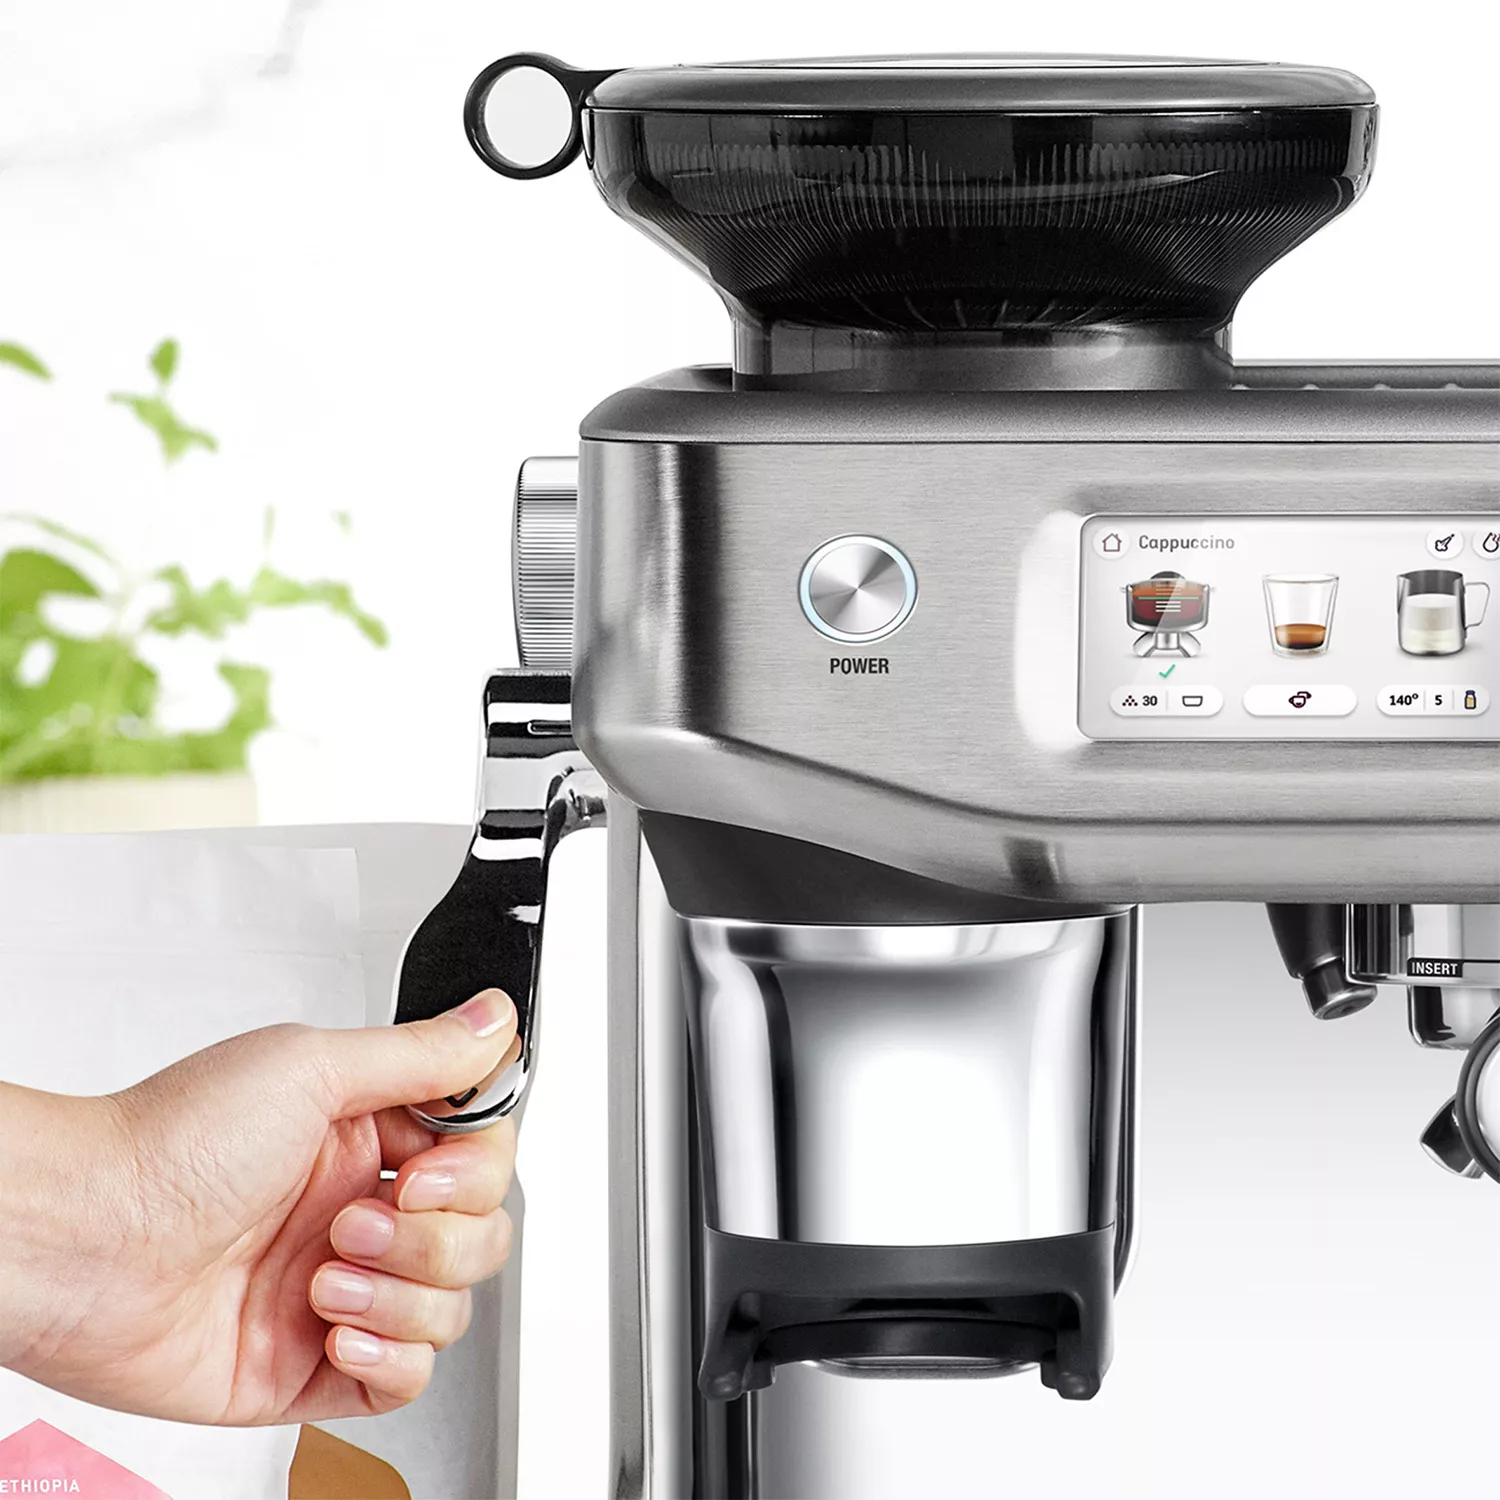 Slash 32% Off This L'OR Barista System And Save Tons On Amazing